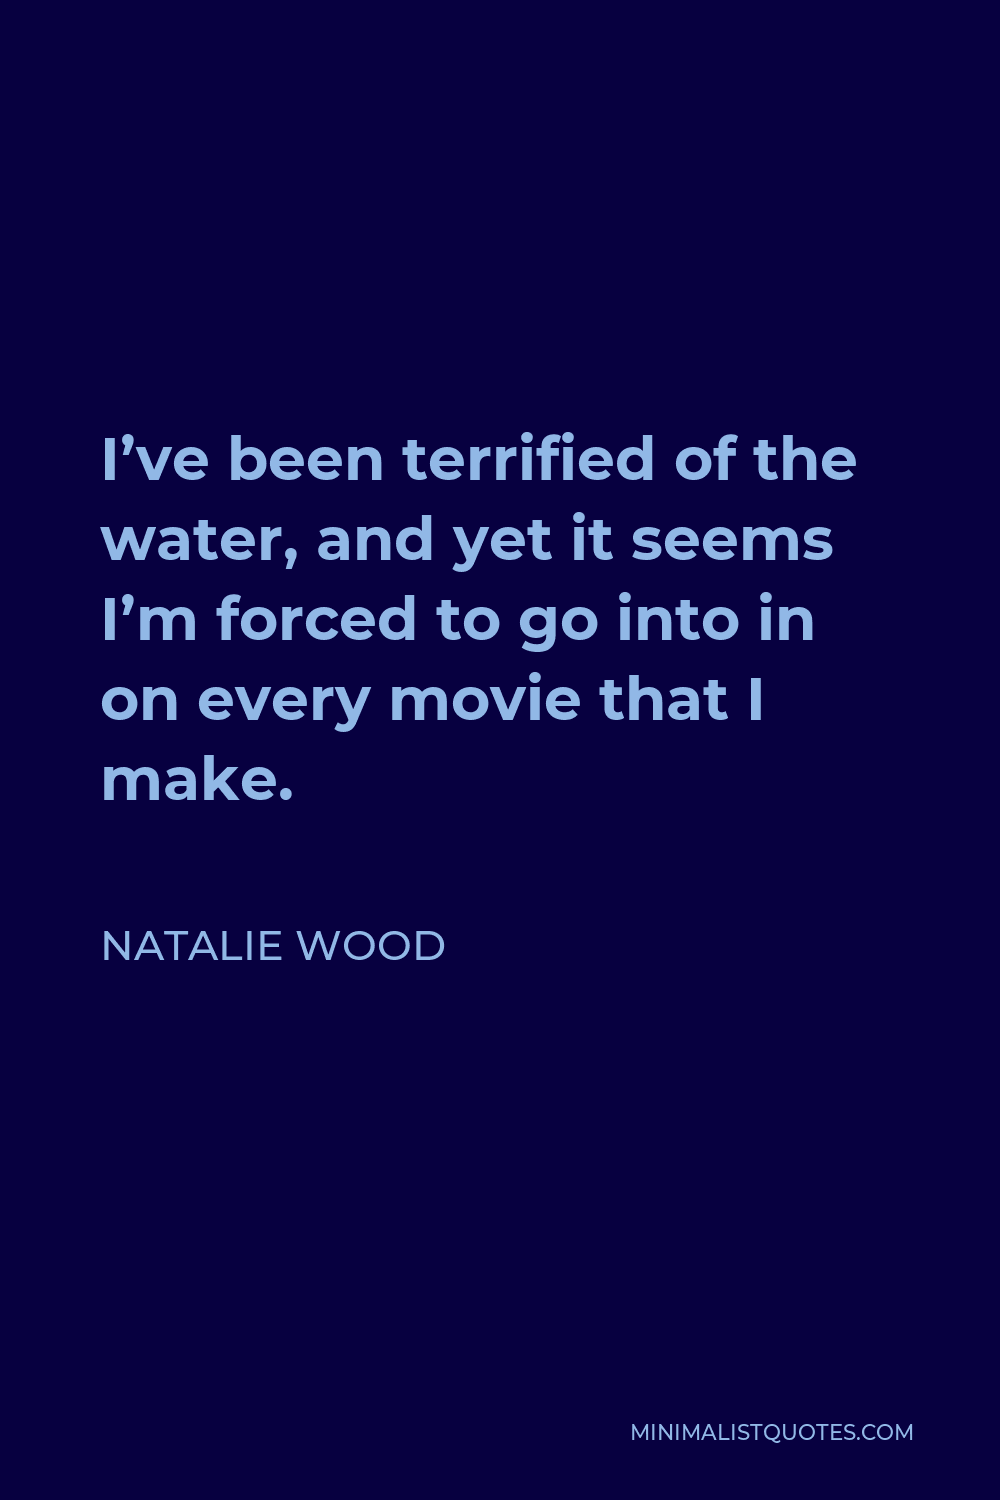 Natalie Wood Quote - I’ve been terrified of the water, and yet it seems I’m forced to go into in on every movie that I make.